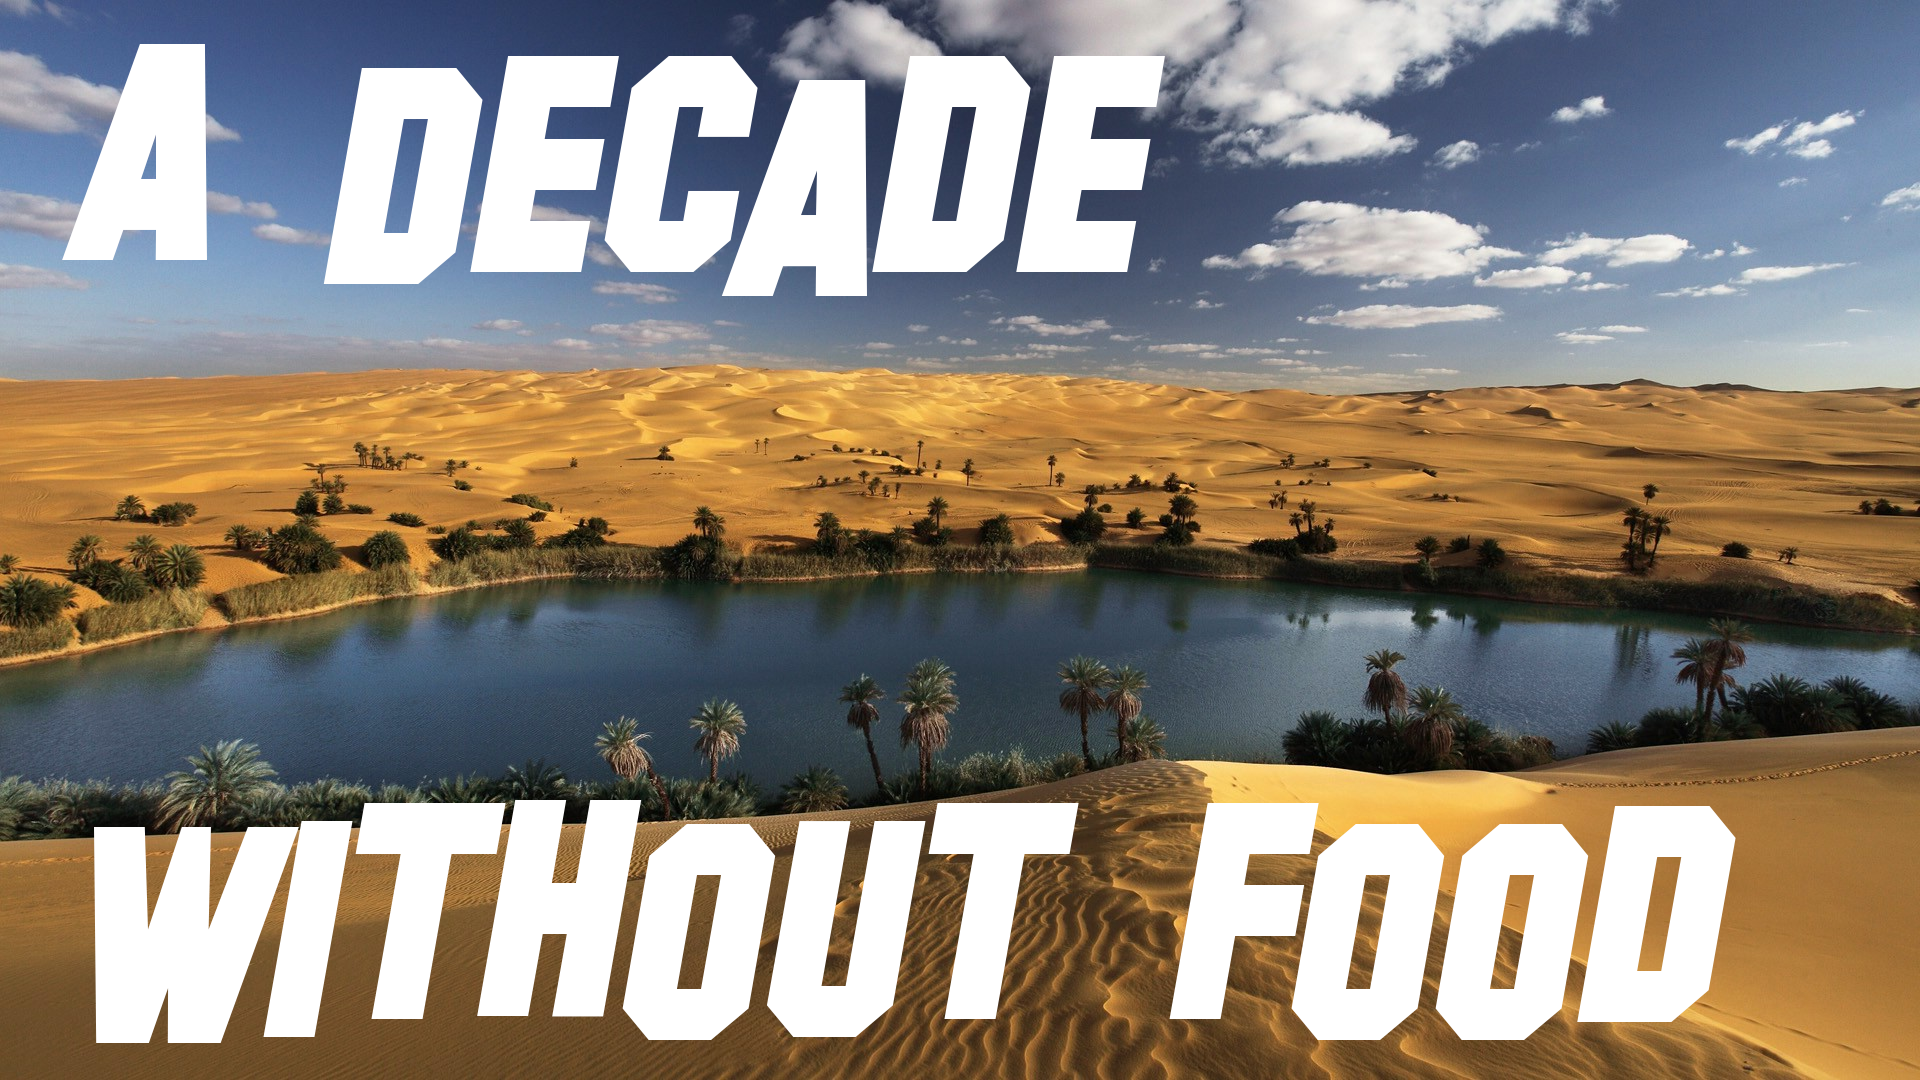 A Decade Without Food